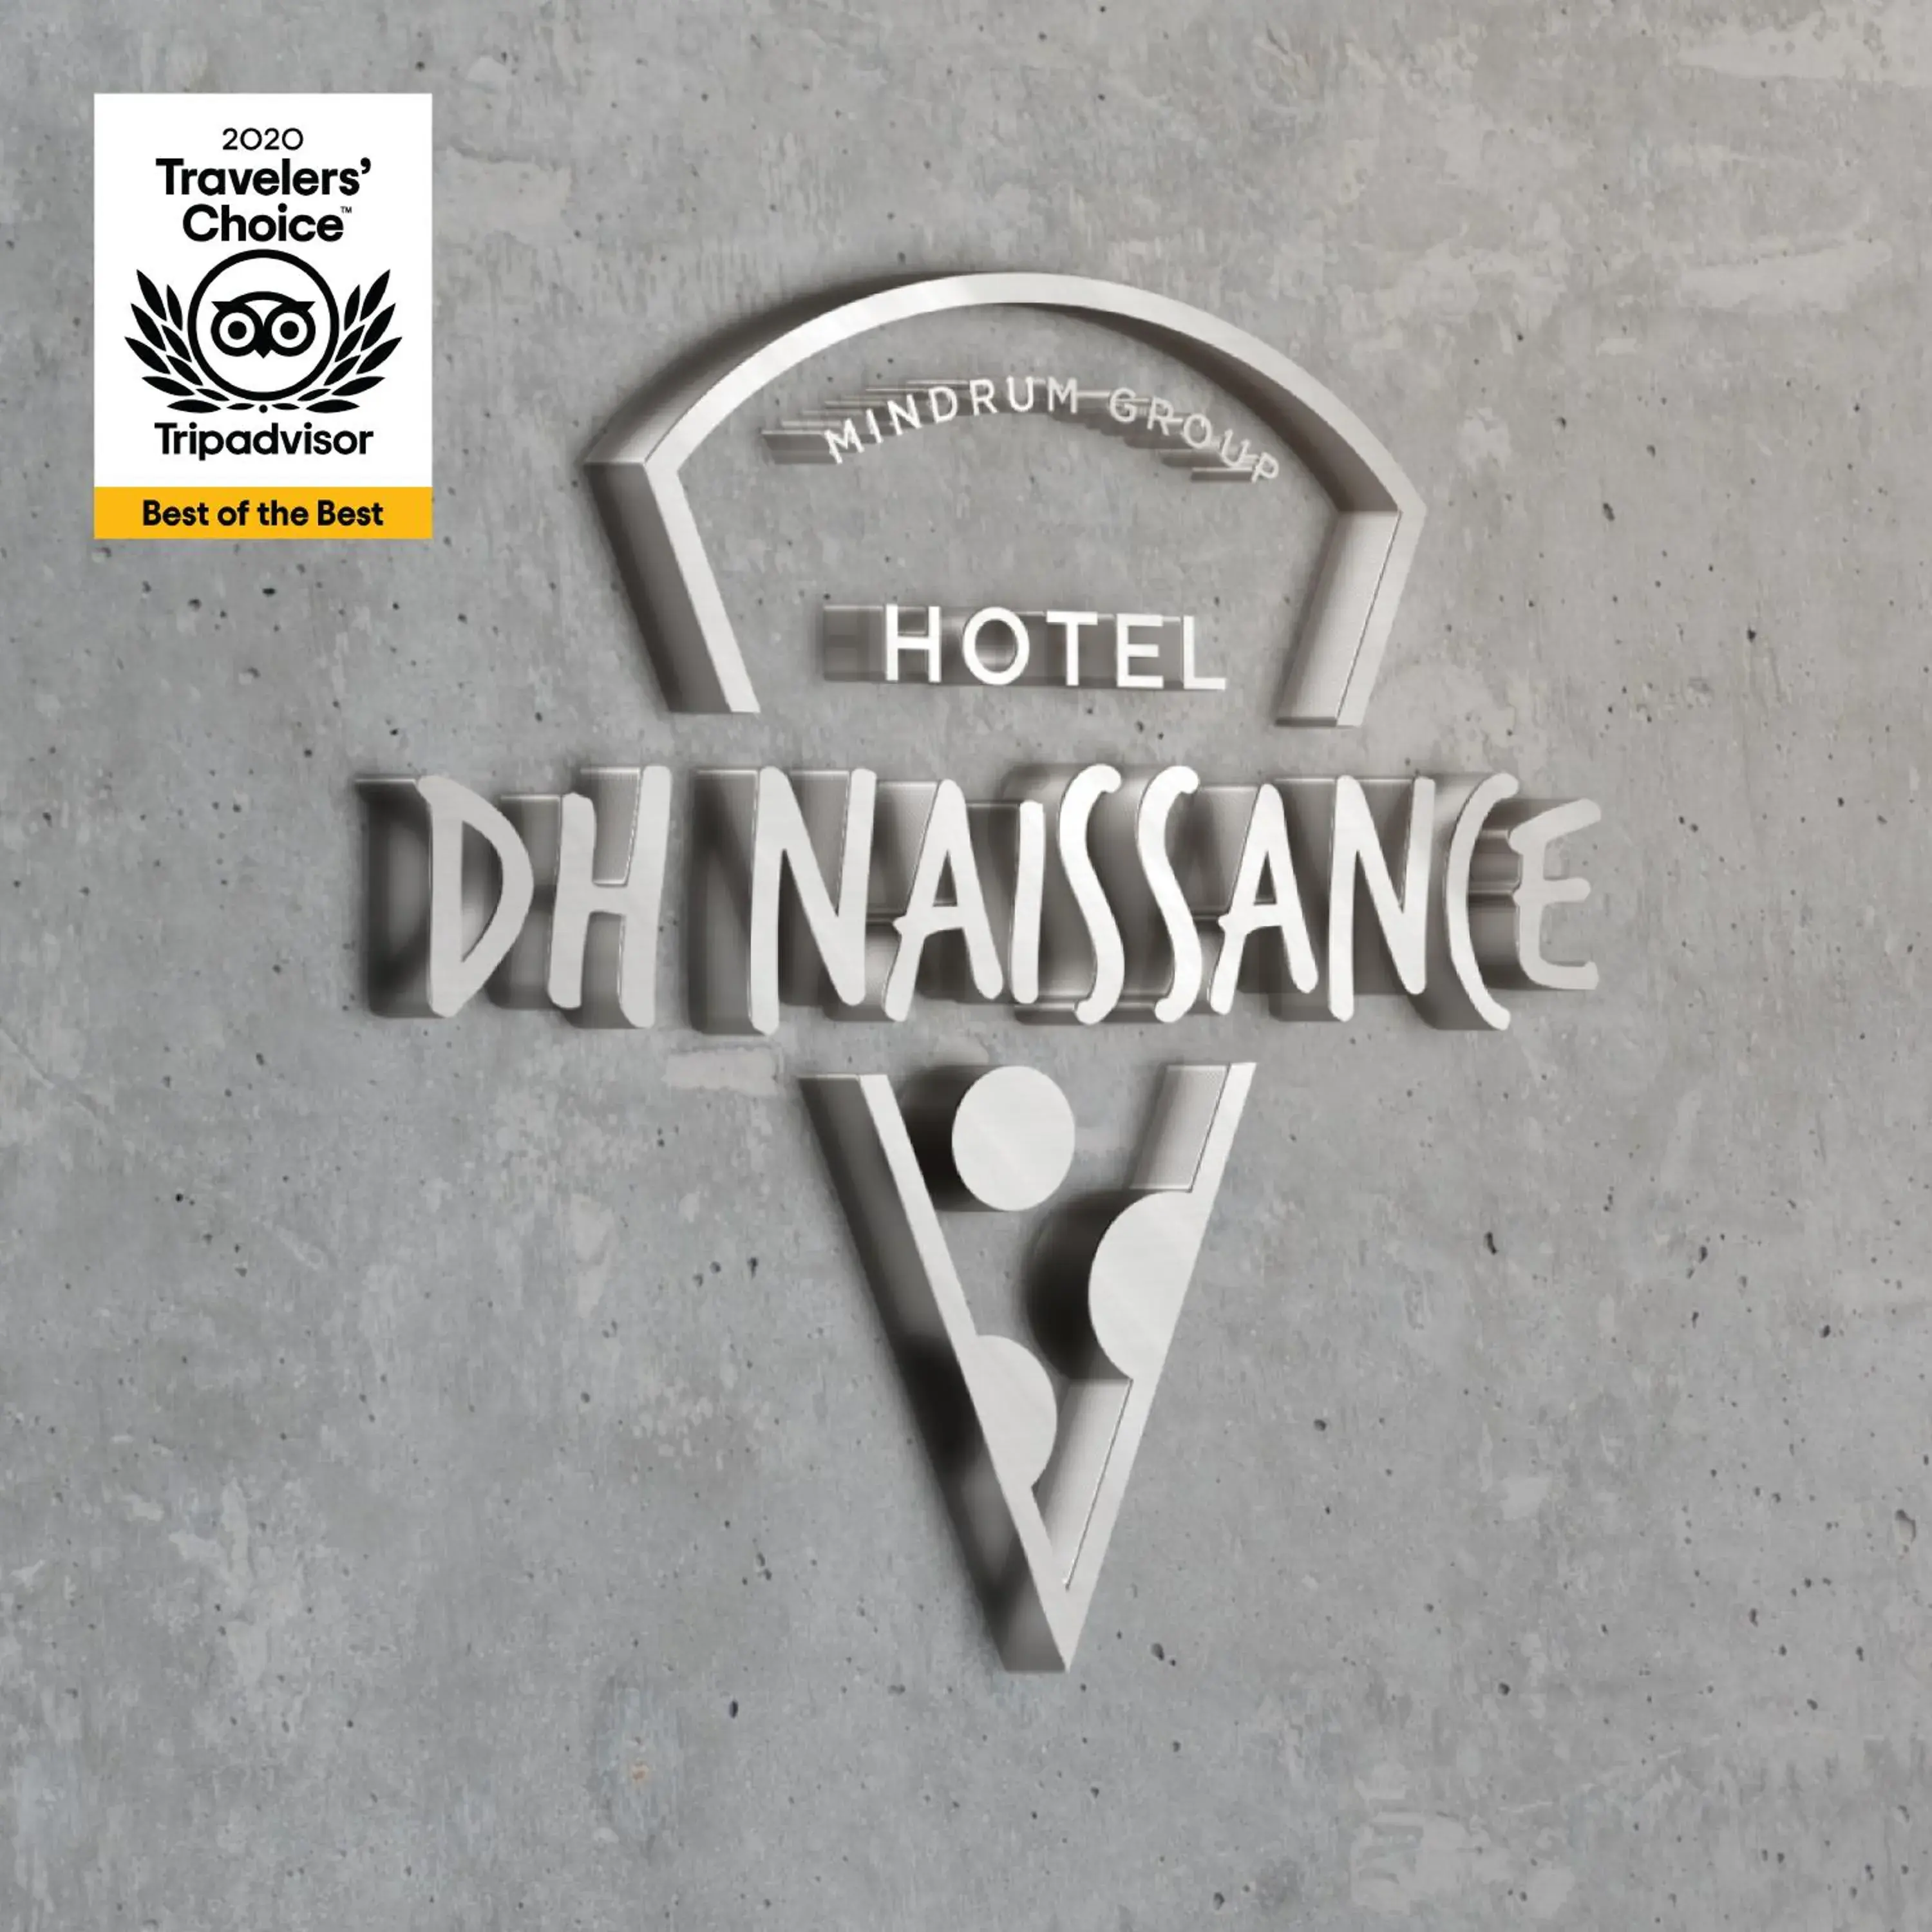 Friendly DH Naissance Hotel by Mindrum group